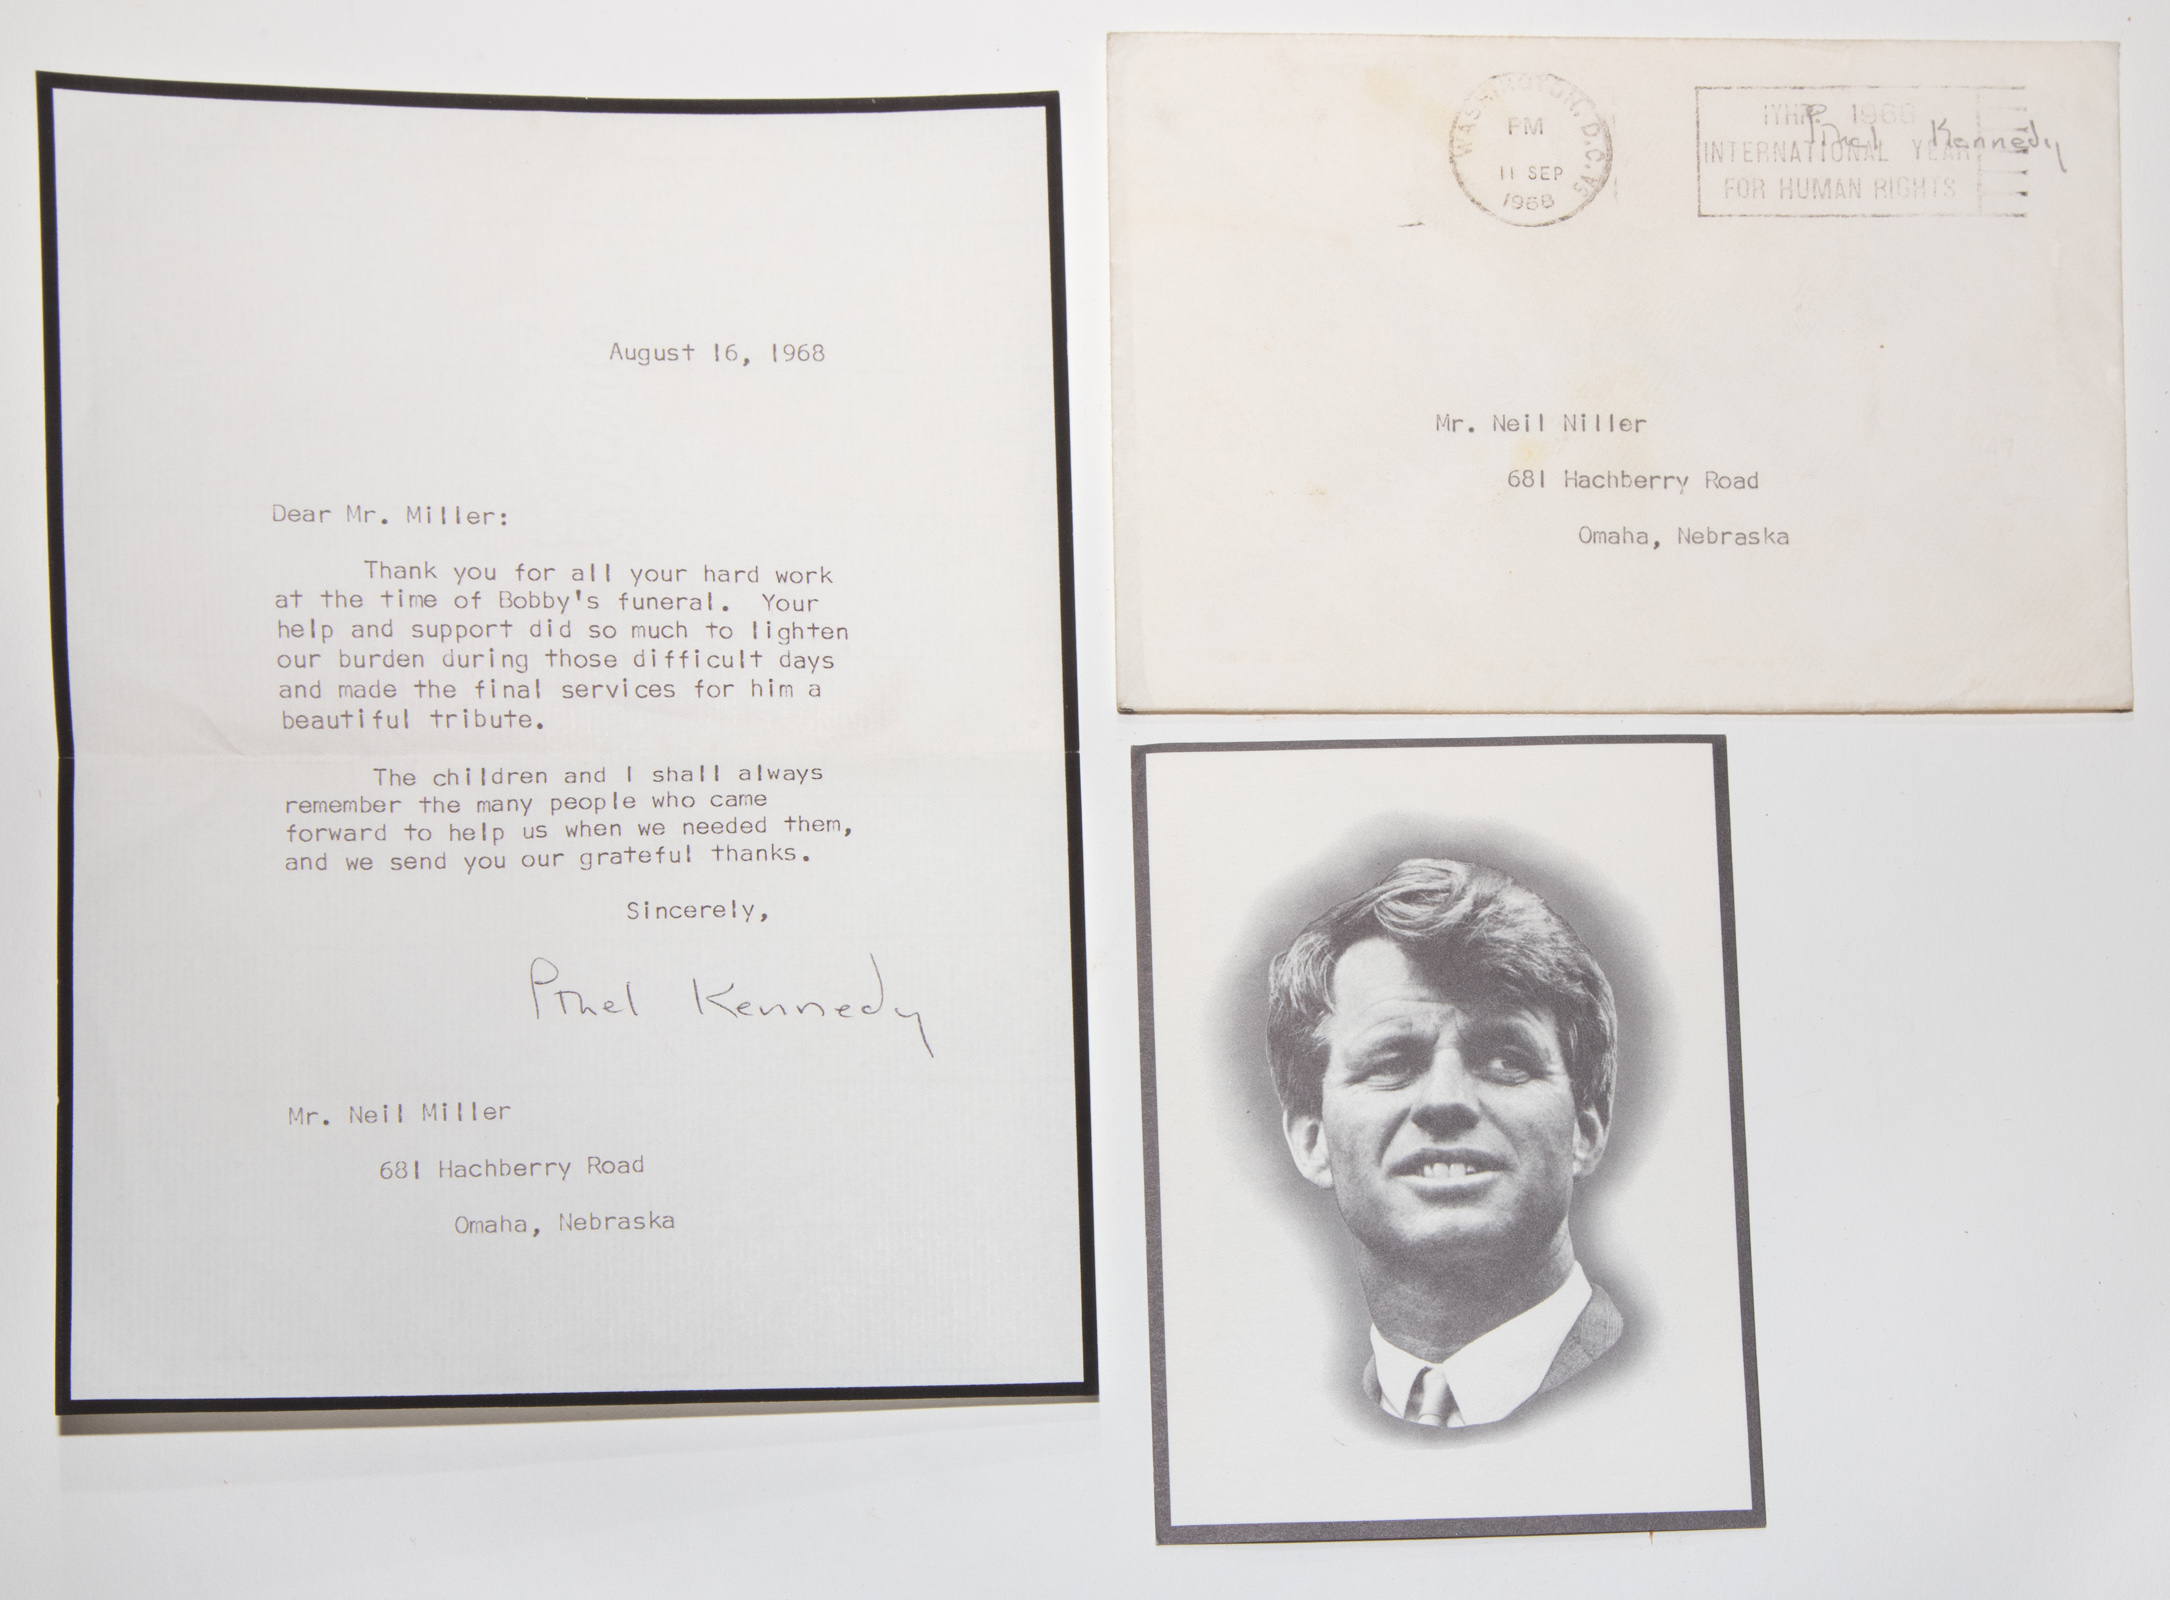 ETHEL KENNEDY, TYPED NOTE, SIGNED,